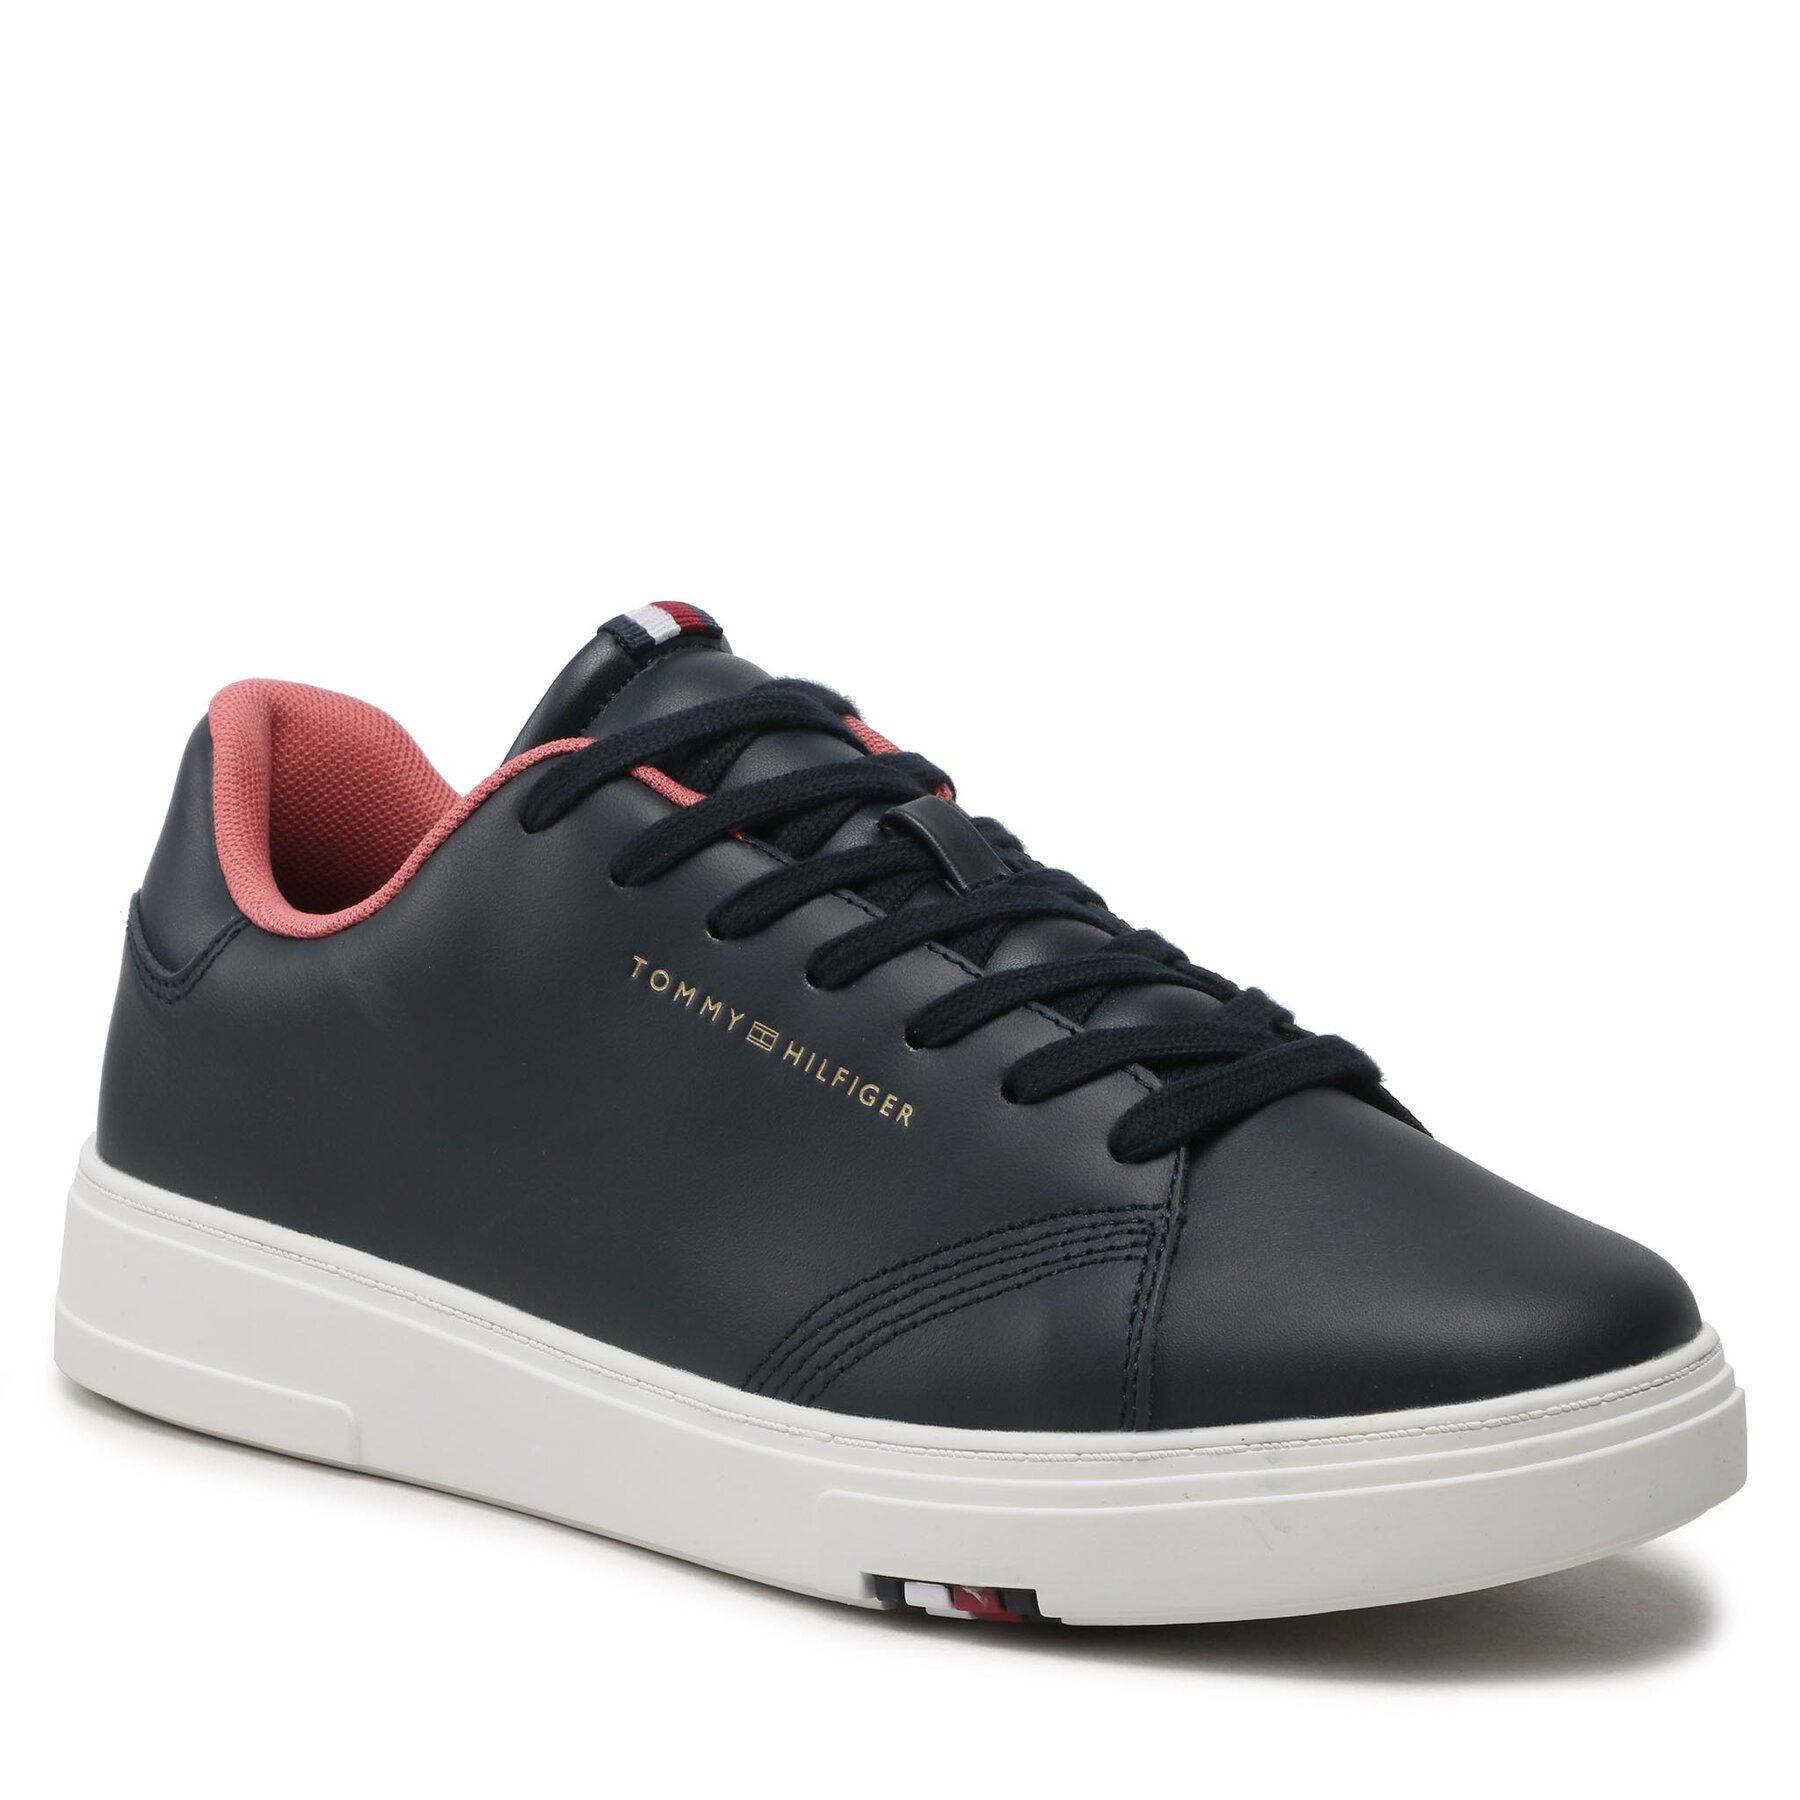 Sneakers Tommy Hilfiger Elevated Rbw Cupsole Leather FM0FM04487 Desert Sky DW5 Cupsole imagine noua